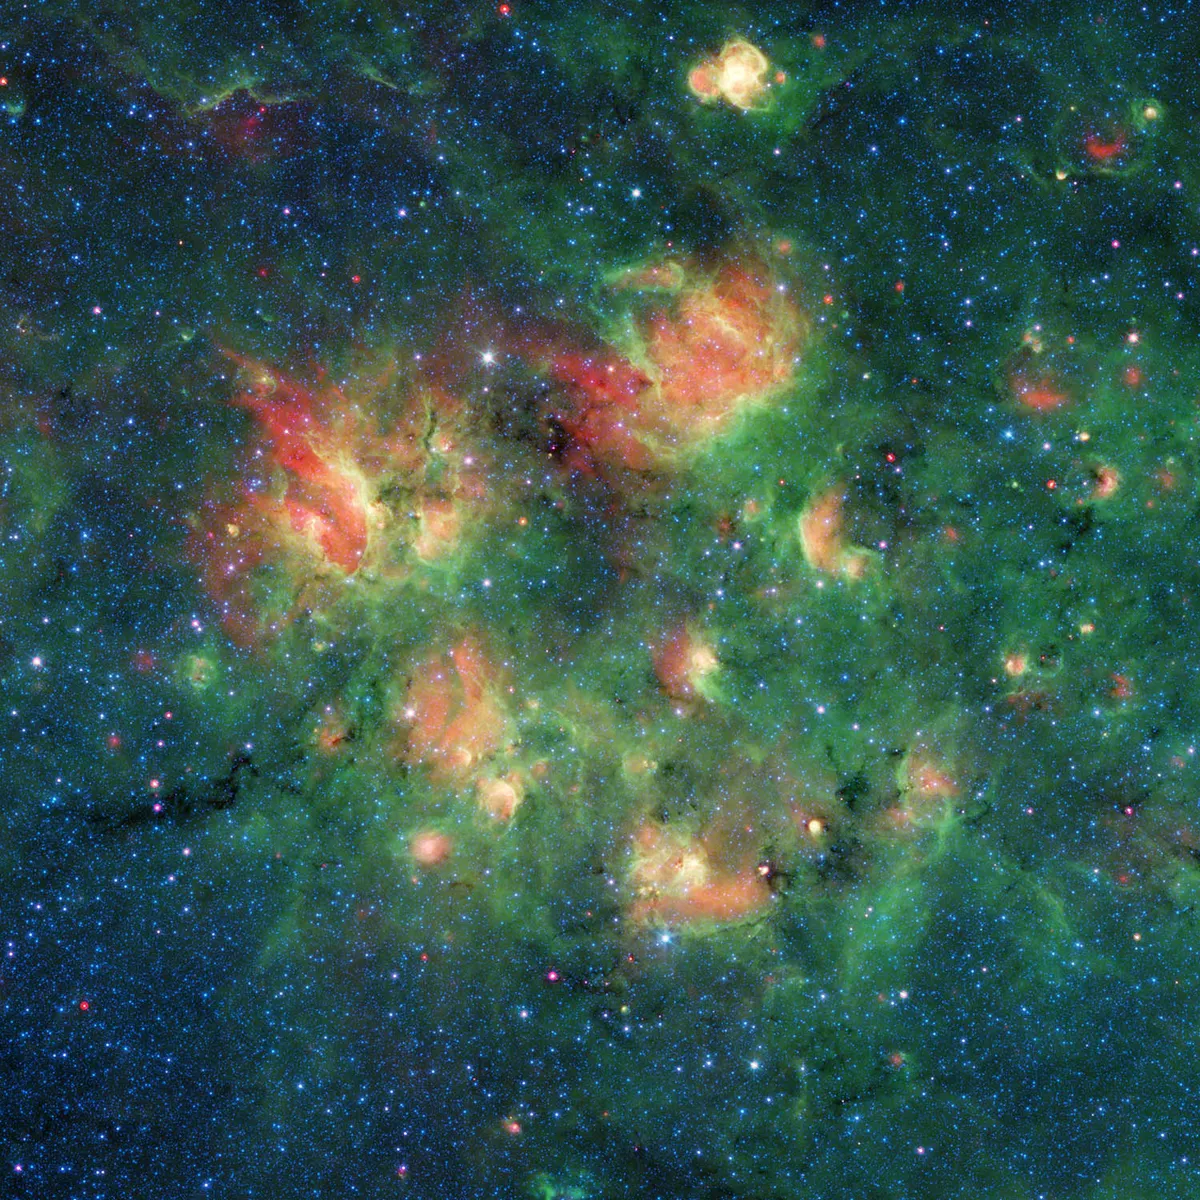 A Spitzer Space Telescope of a region within the Milky Way. Credit: NASA/JPL-Caltech/Milky Way Project